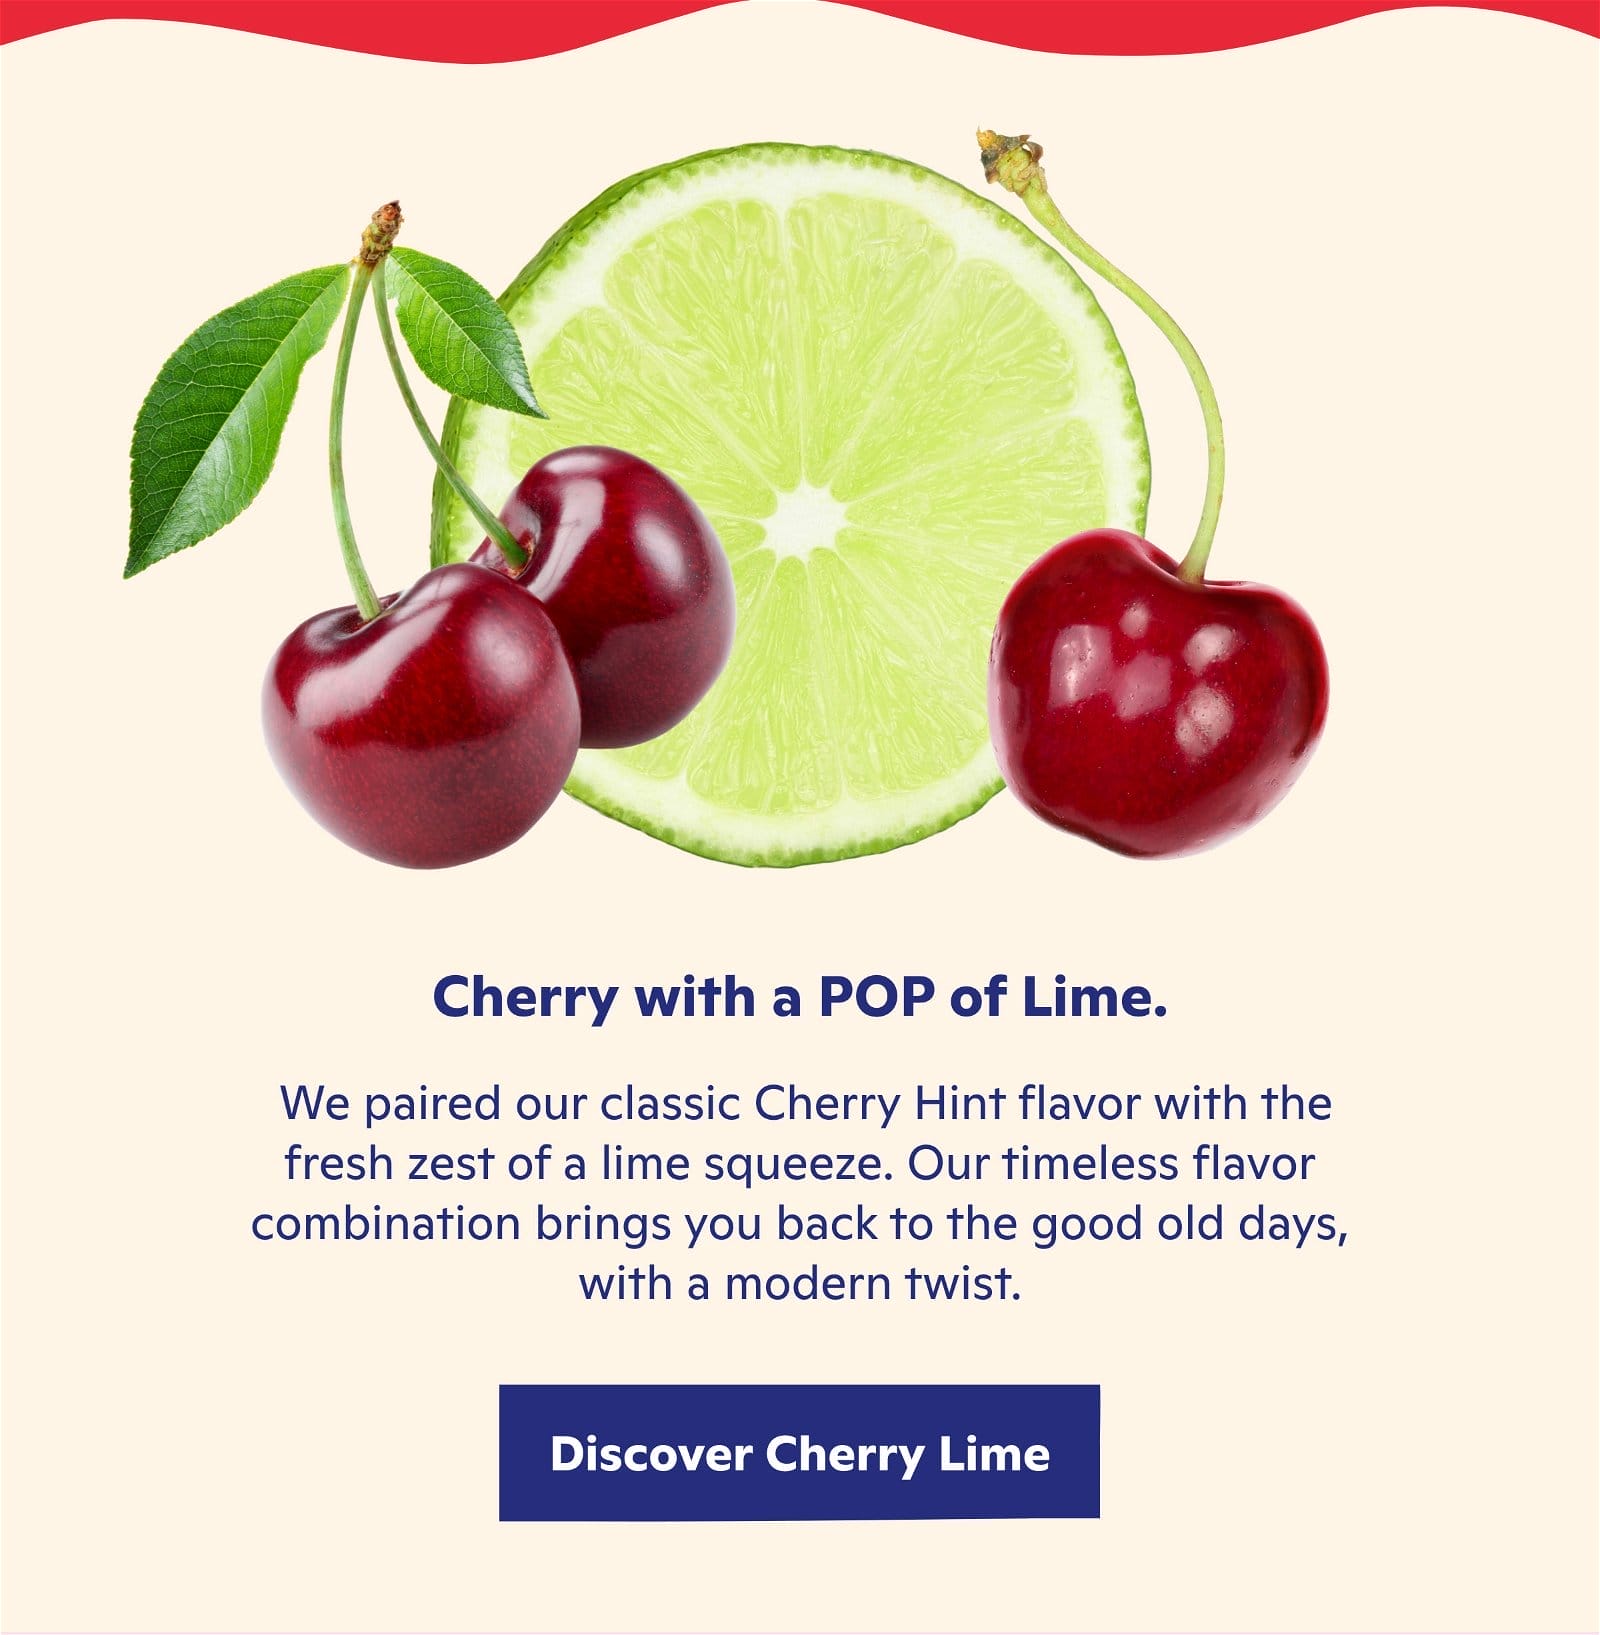 Cherry with a POP of Lime